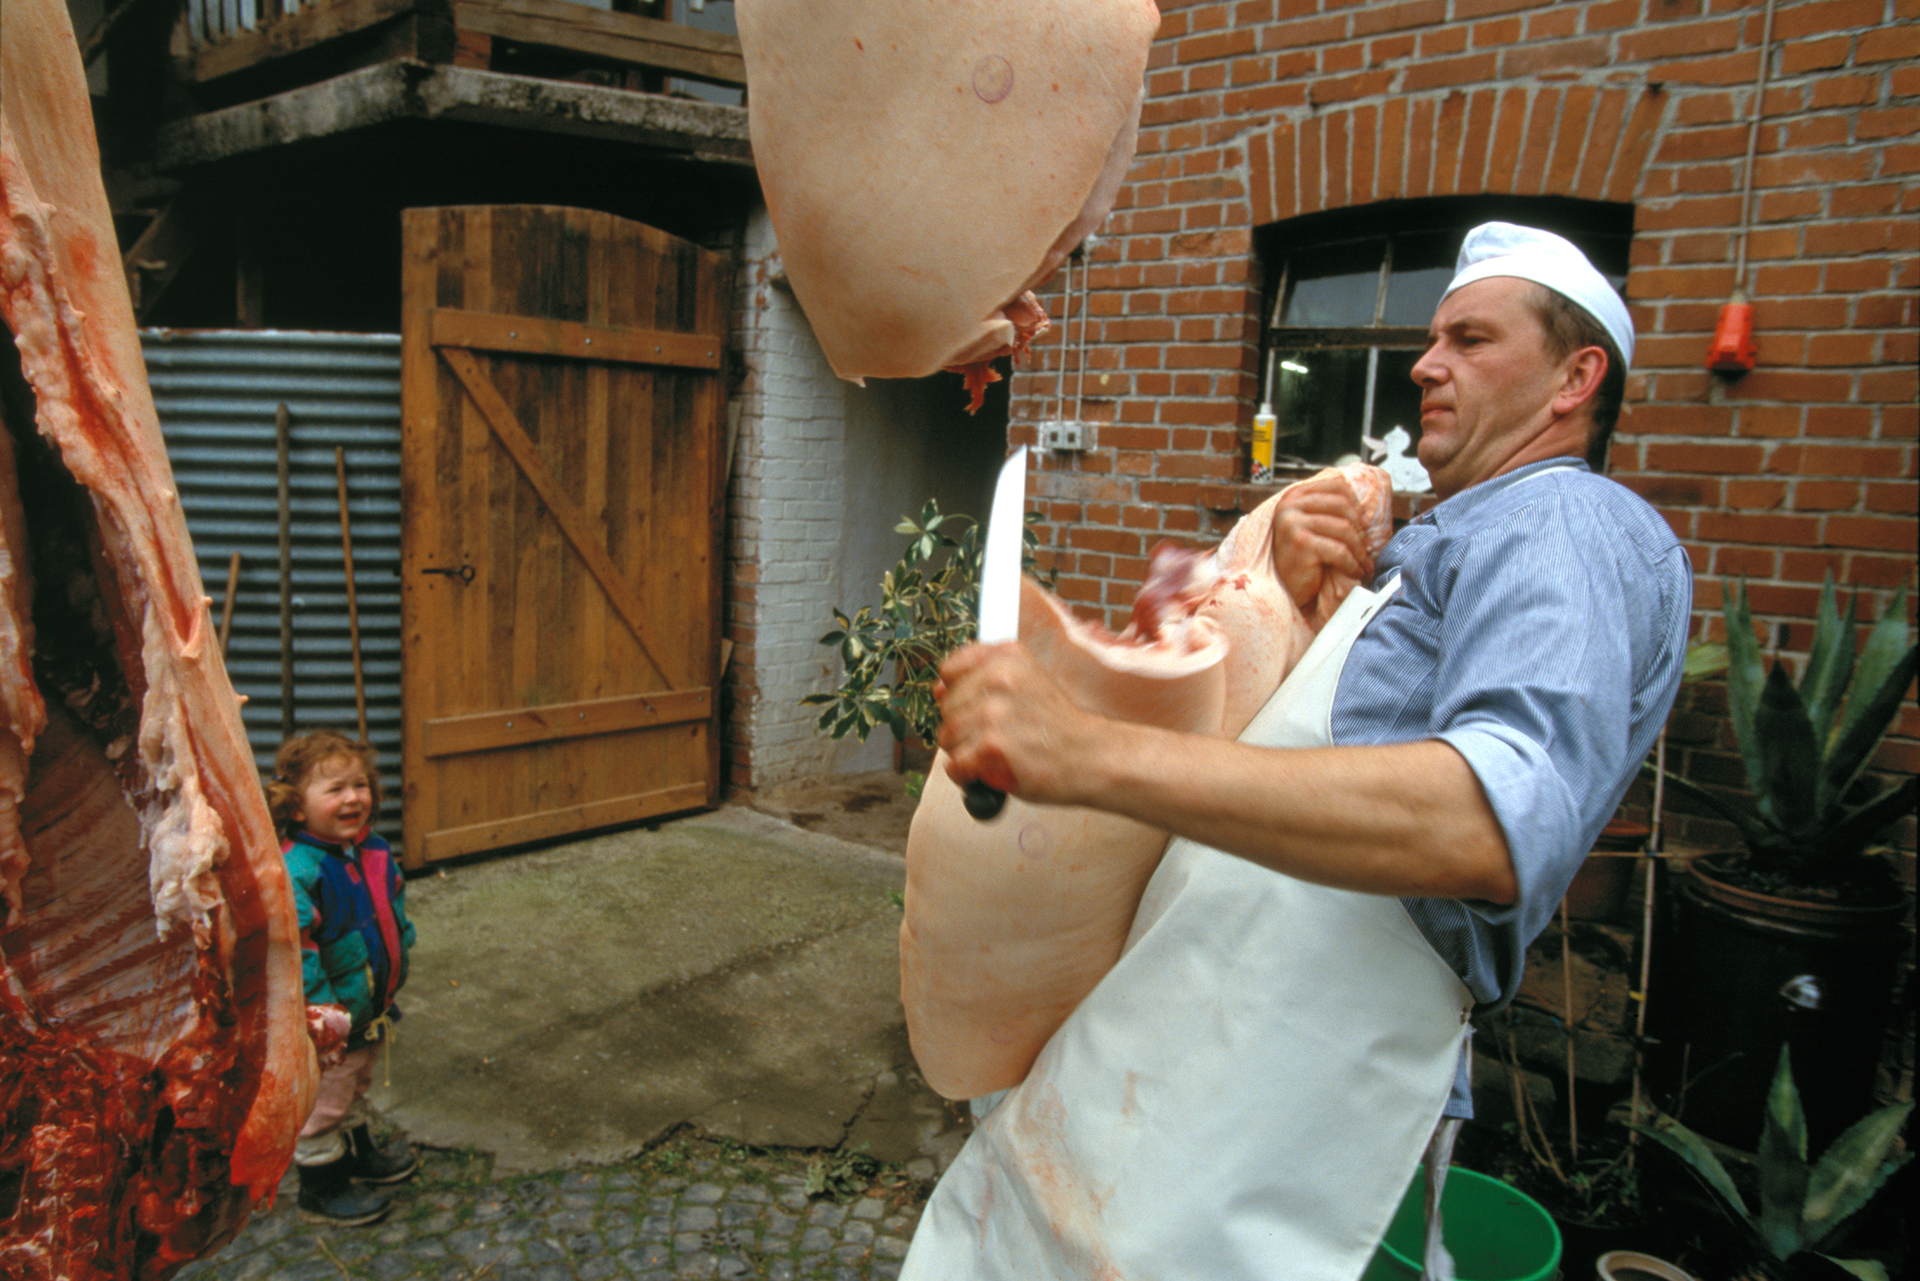  Curiosity and fear duels in a child’s expression as a butcher slices a pig in half in a farmyard.  Alsfeld, Germany  